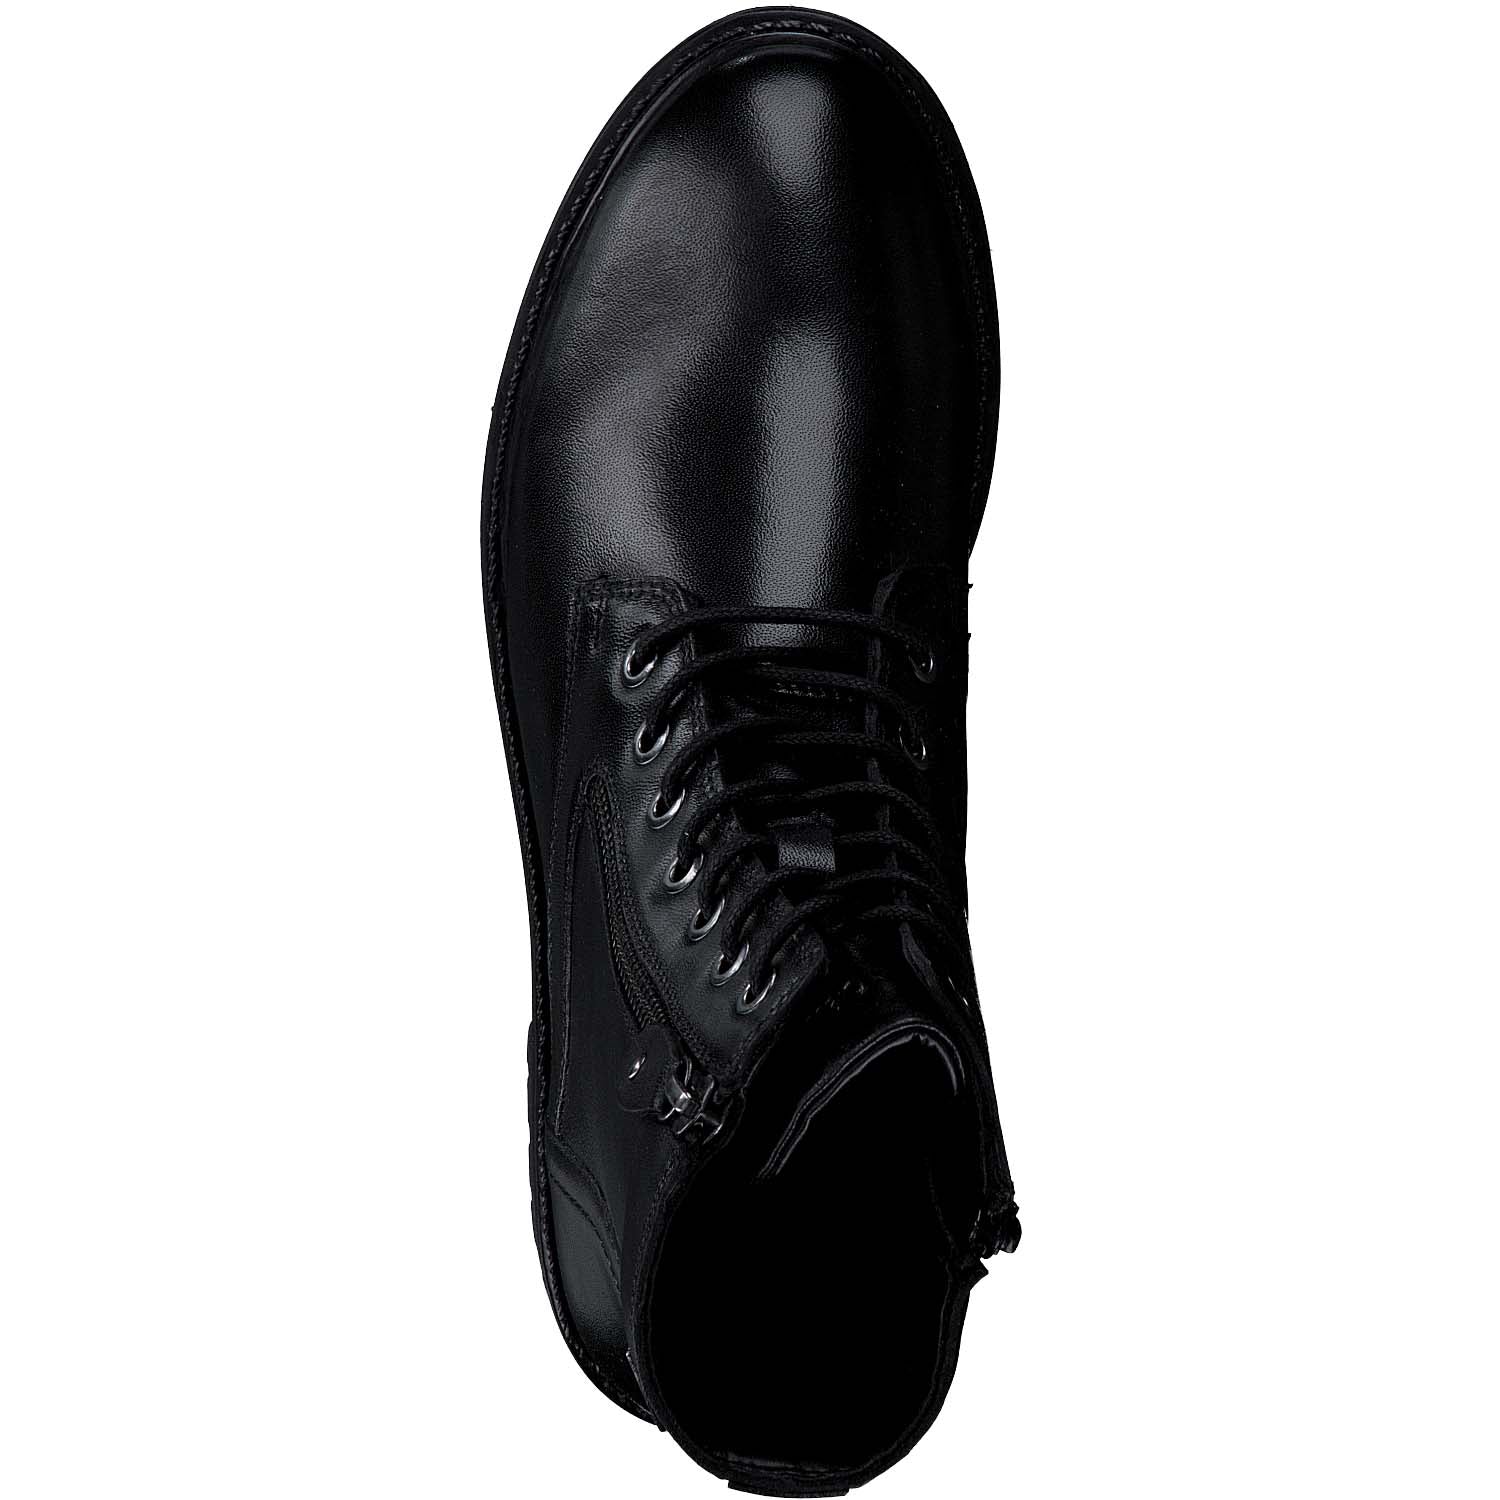 Classic black front view of S. Oliver lace-up boot.